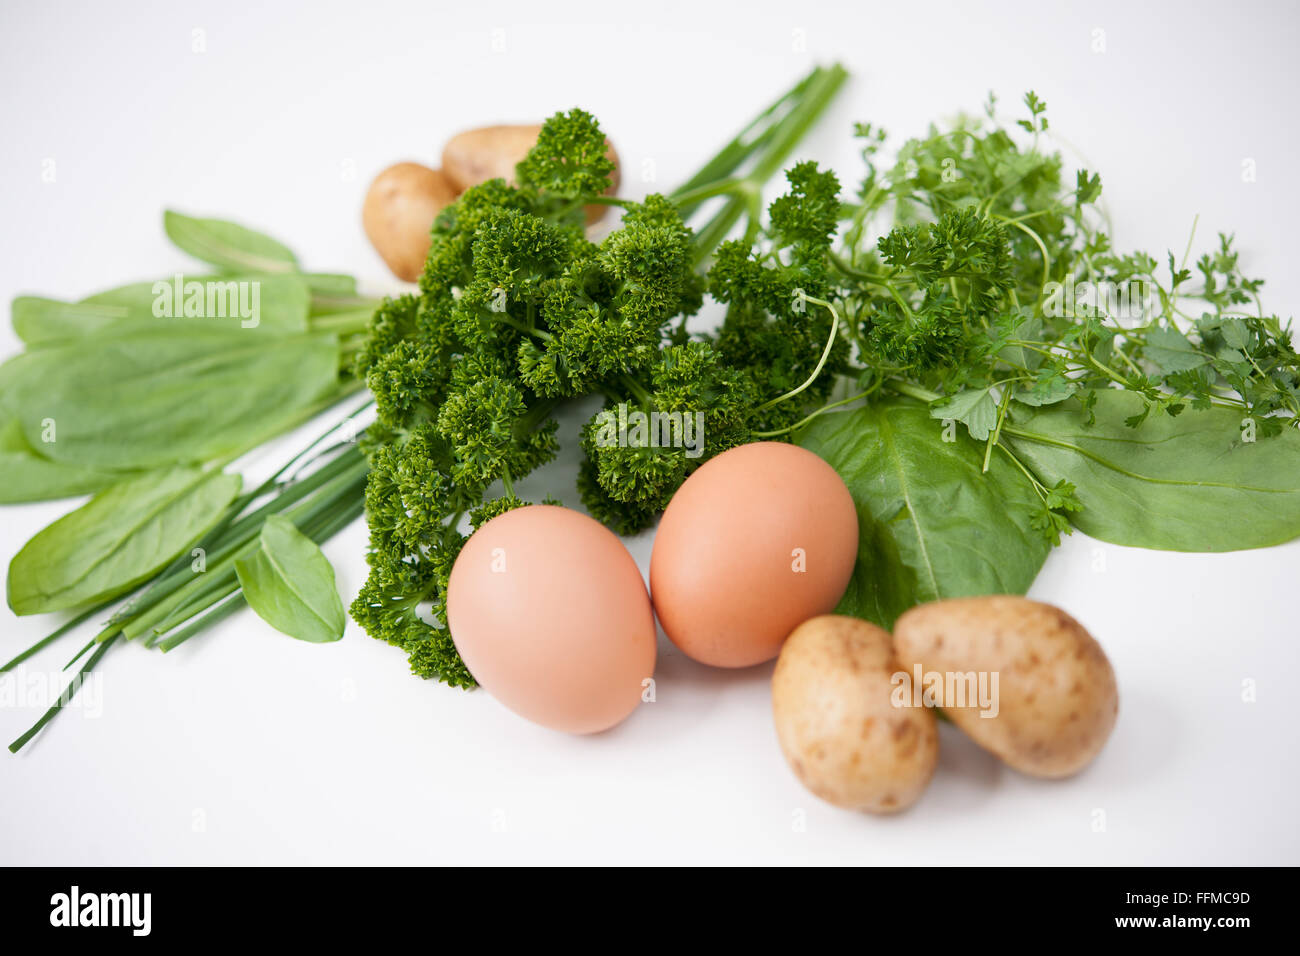 Picture of 'Frankfurter Grüne Soße', taken on 15/02/2016 in Oberursel. 'Grüne Soße' is a traditional Food from Frankfurt, containing parsley, sorrel, chervil, borage, burnet and cress. It s traditionally served with potatoes ans boiled eggs. Stock Photo